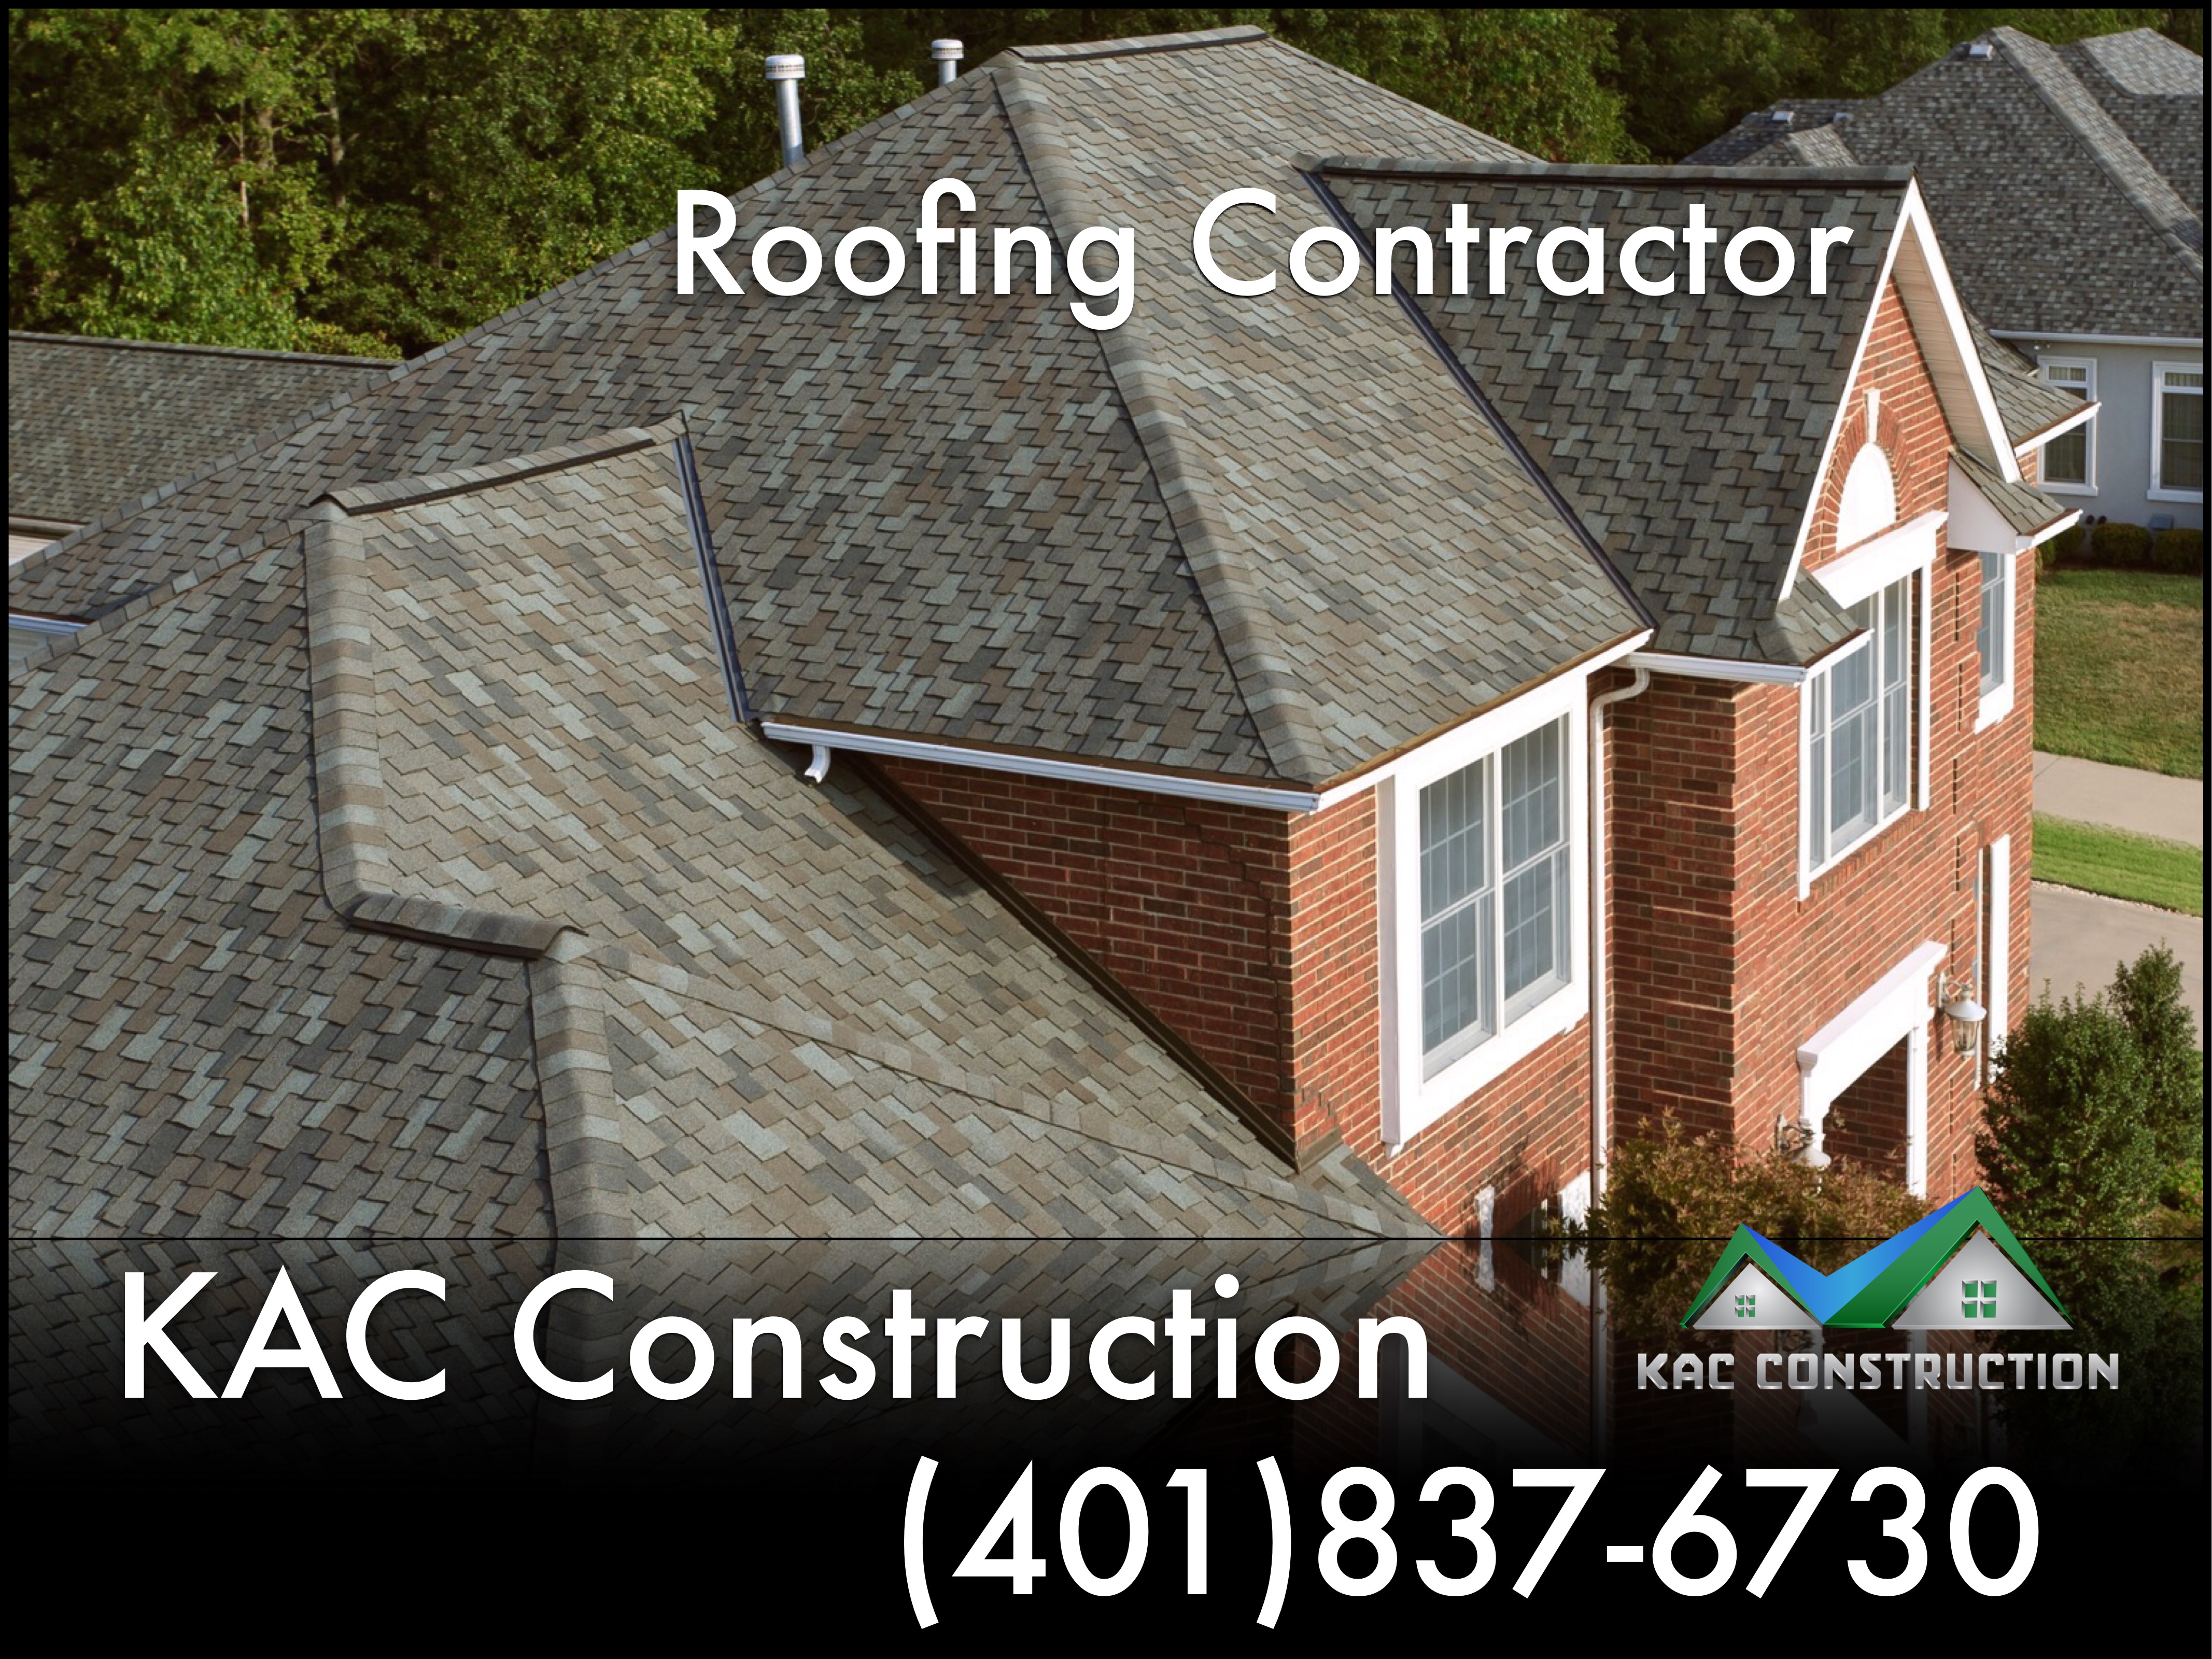 Roofing ri, roofing contractor ri, roofing in ri, roof ri